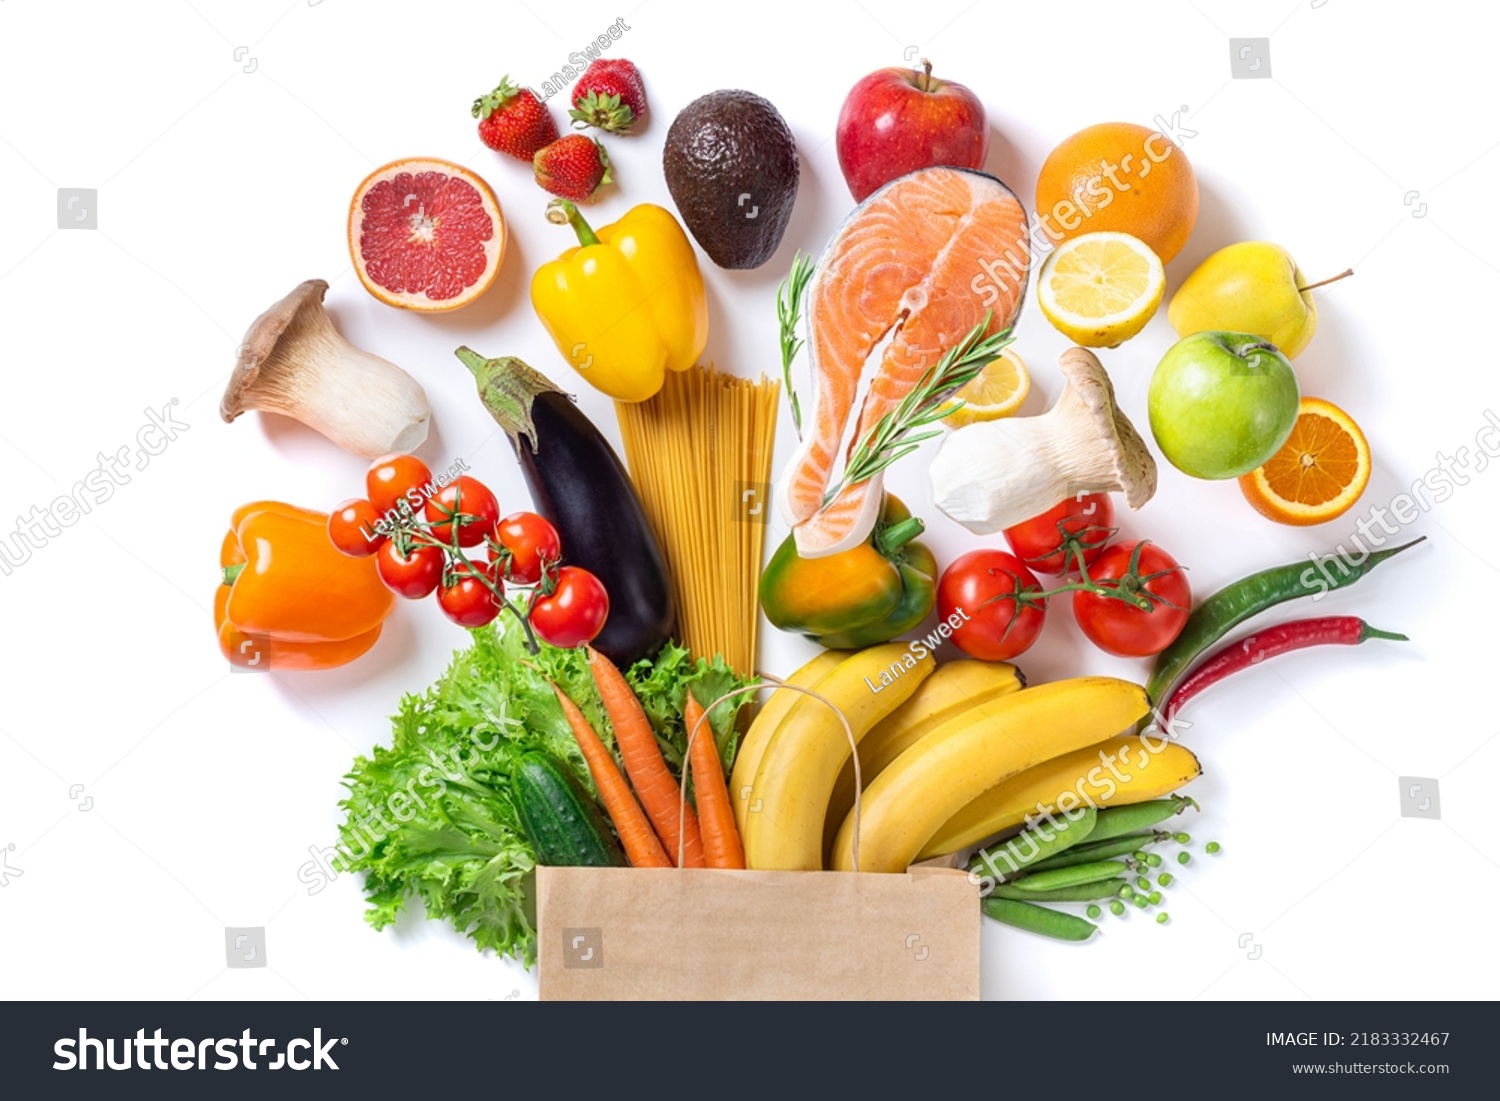 Healthy food background. Healthy food in paper bag fish, vegetables and fruits on white. Shopping food supermarket concept #2183332467